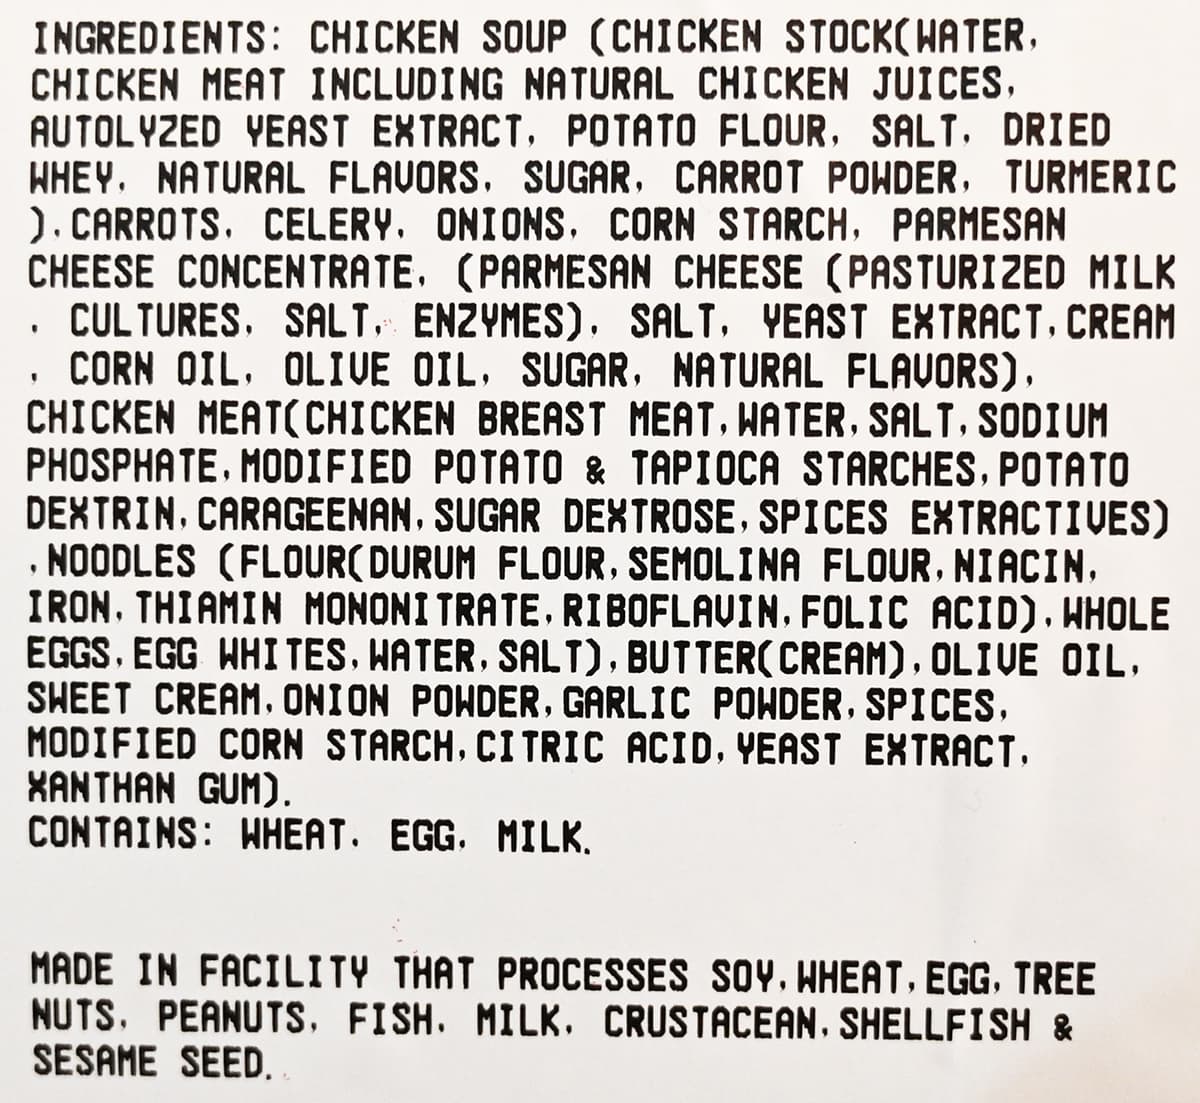 Closeup image of the label from the soup showing ingredients.